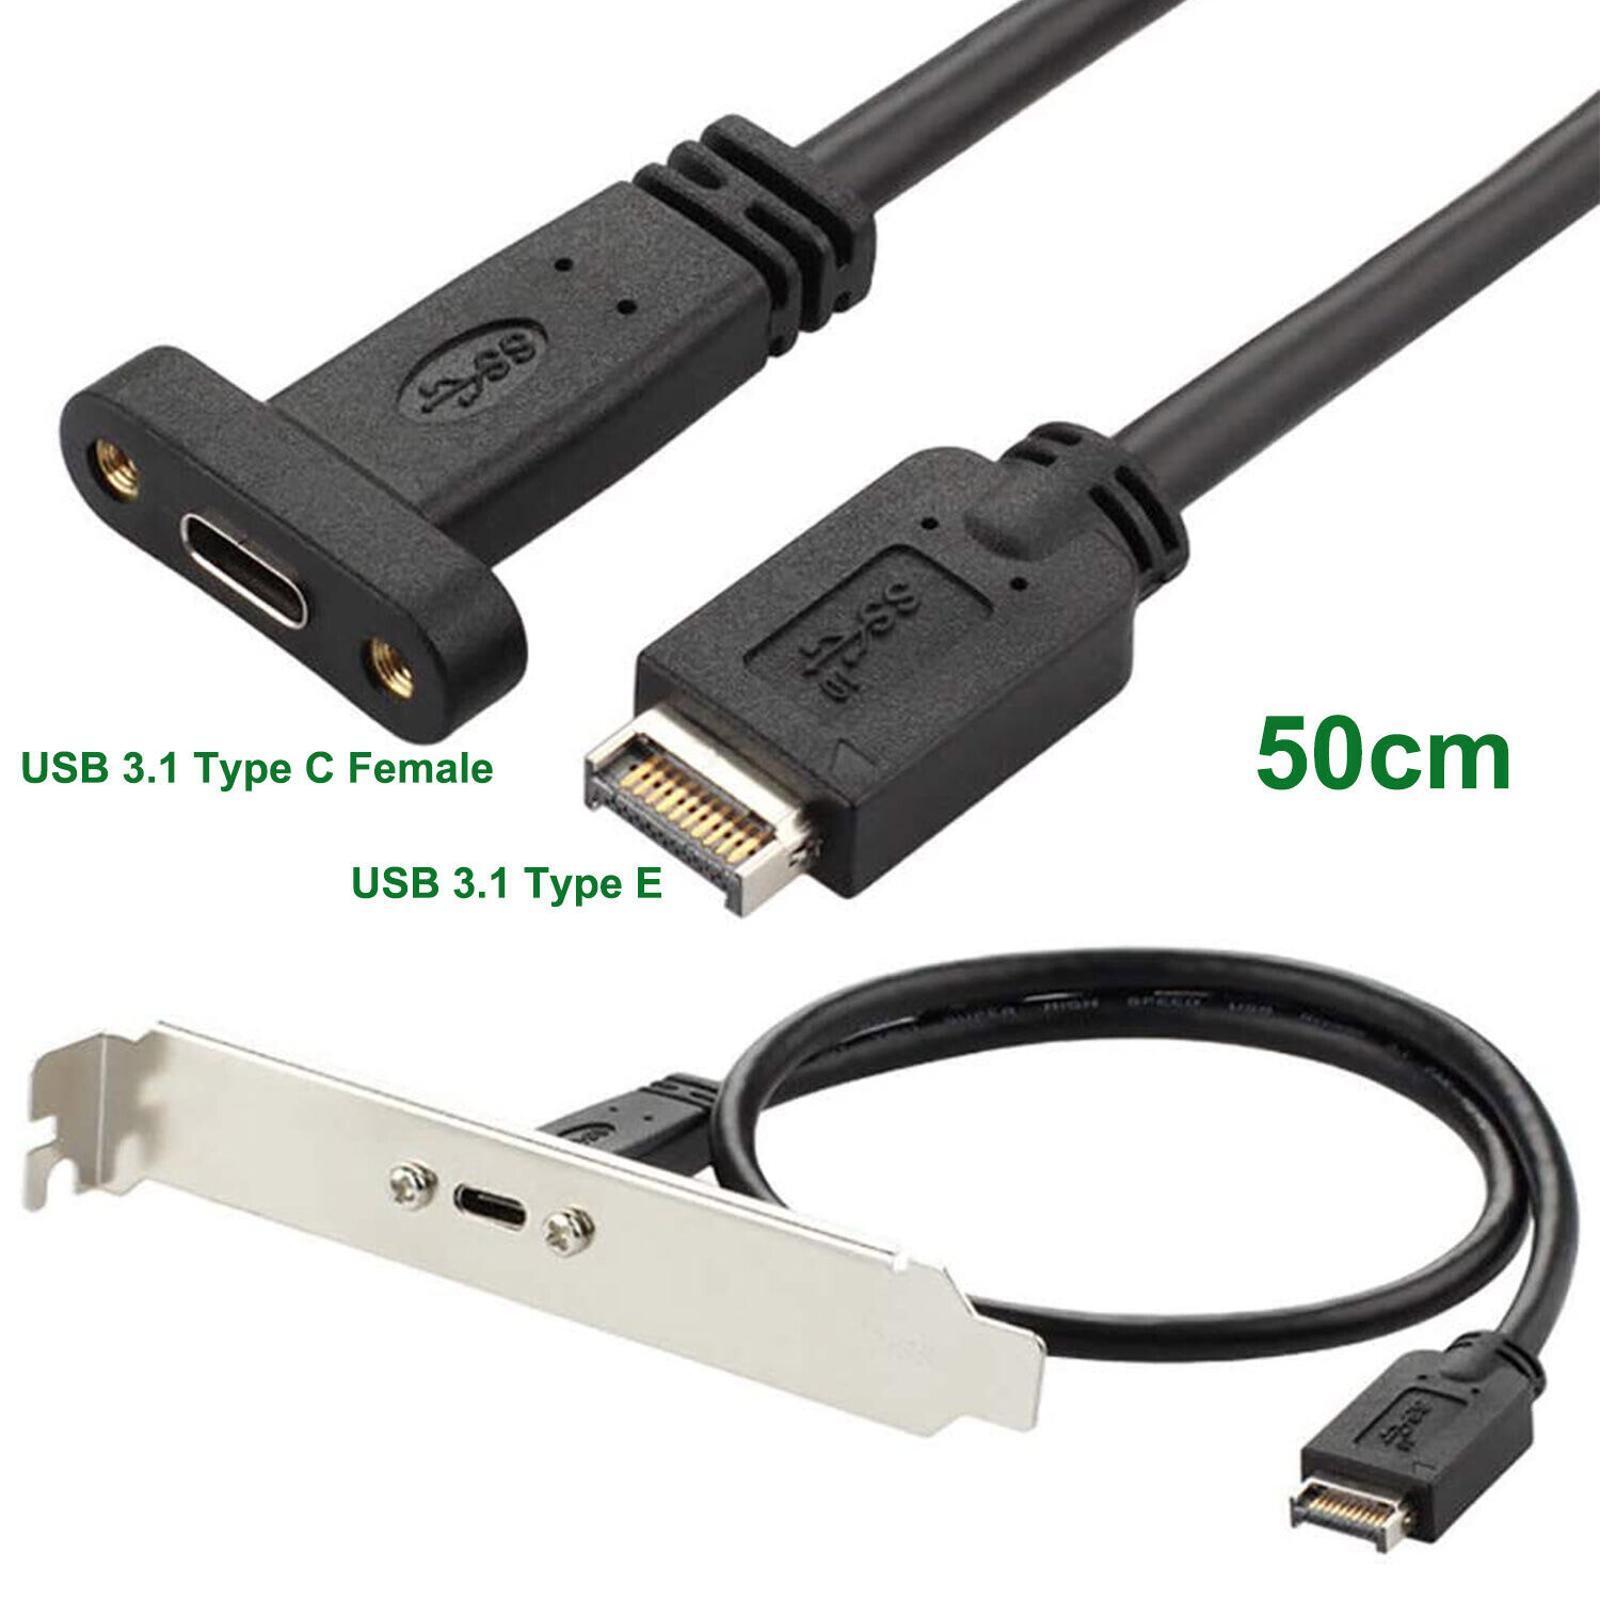 P&P USB 3.1 Type E PCI-E to Type C Female Gen 2 Extension Cable With Bracket